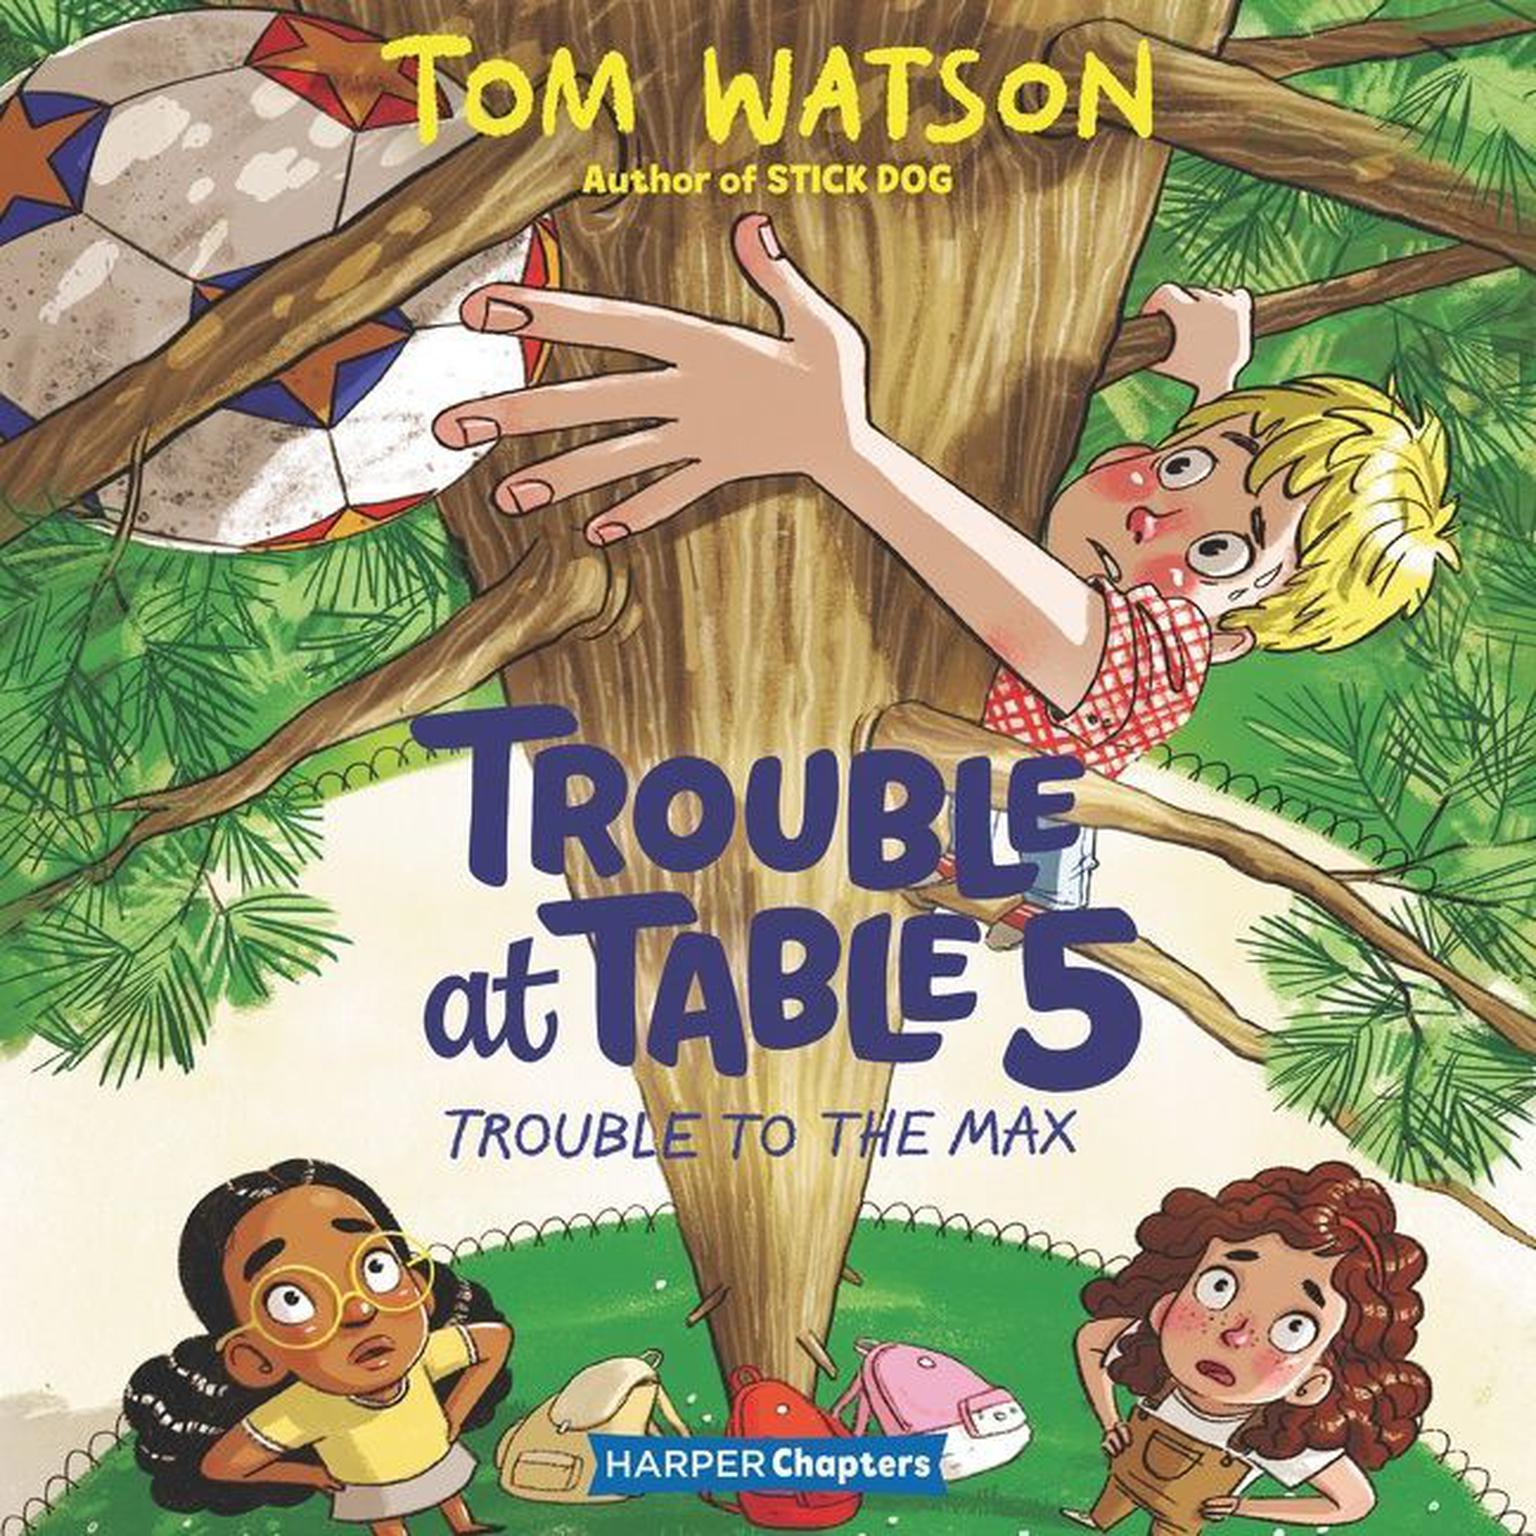 Trouble at Table 5 #5: Trouble to the Max Audiobook, by Tom Watson